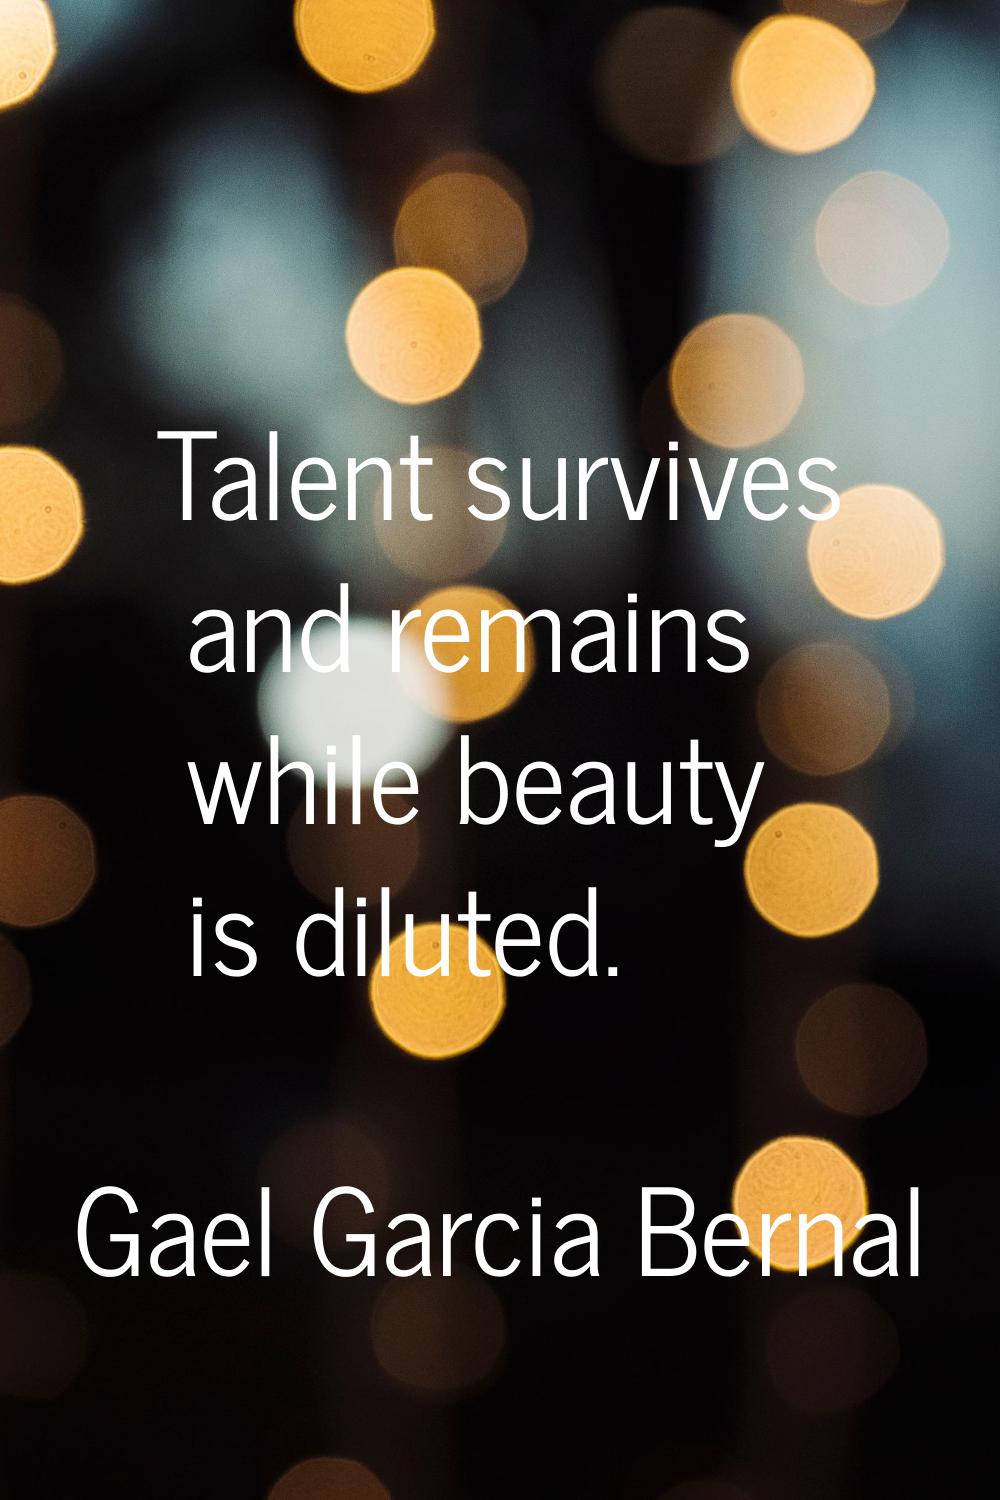 Talent survives and remains while beauty is diluted.